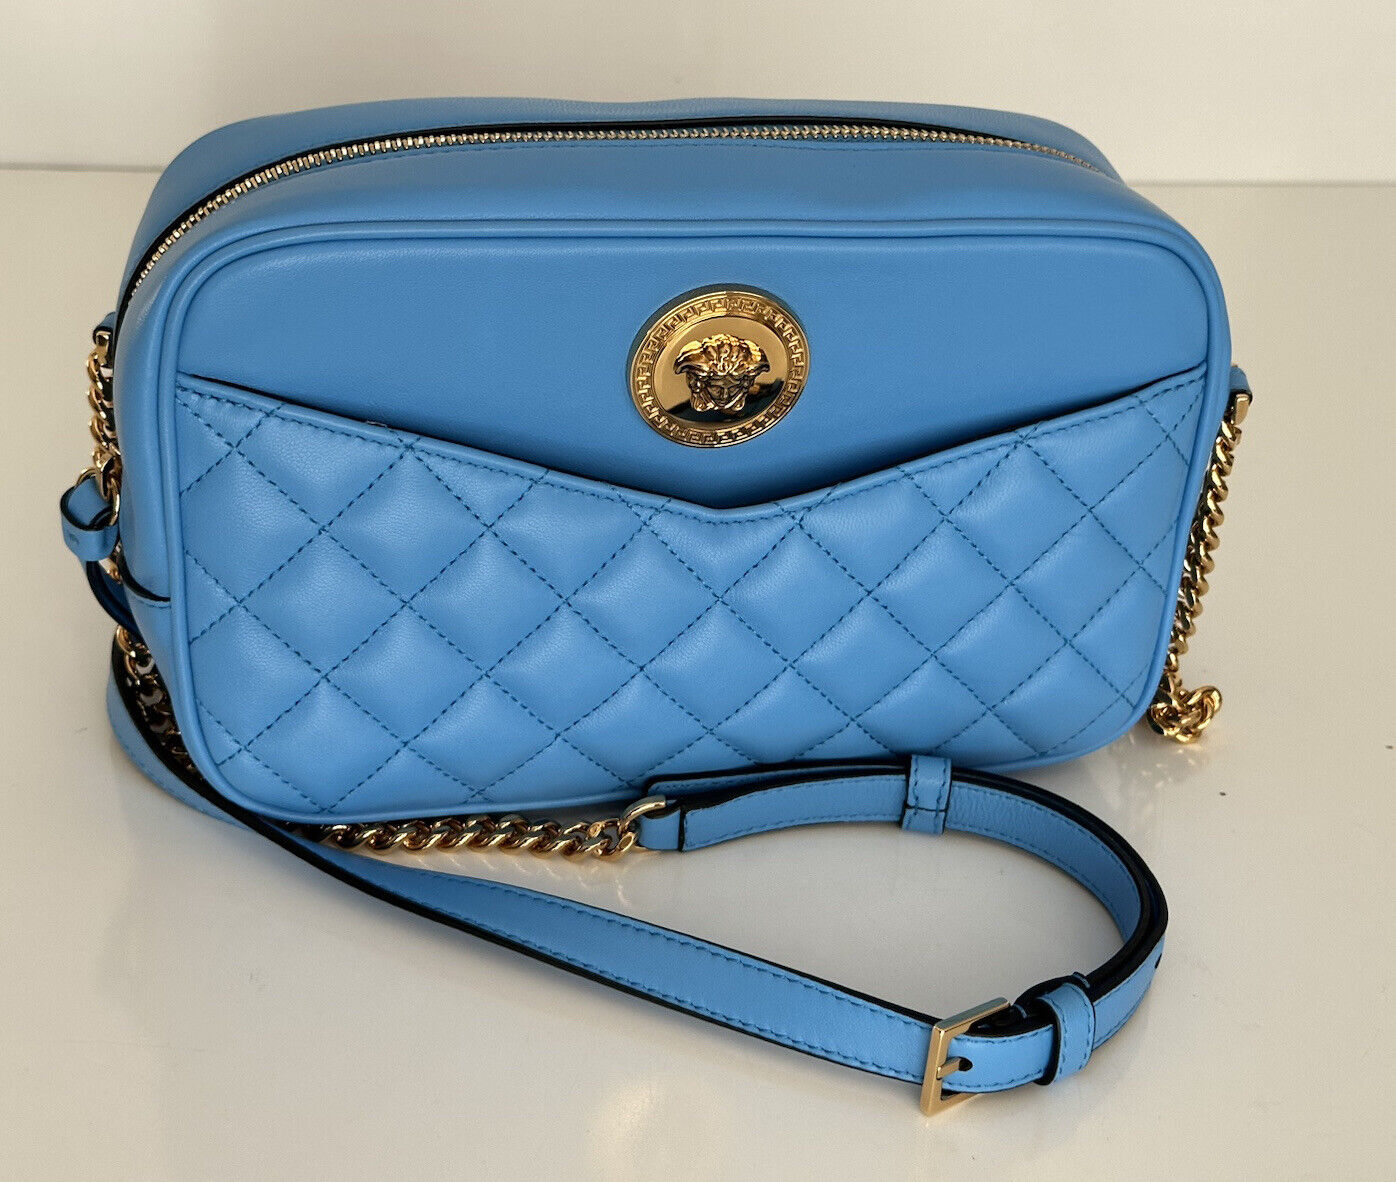 NWT $1275 Versace Quilted Lamb Leather Blue Medium Shoulder Bag 1008828 Italy